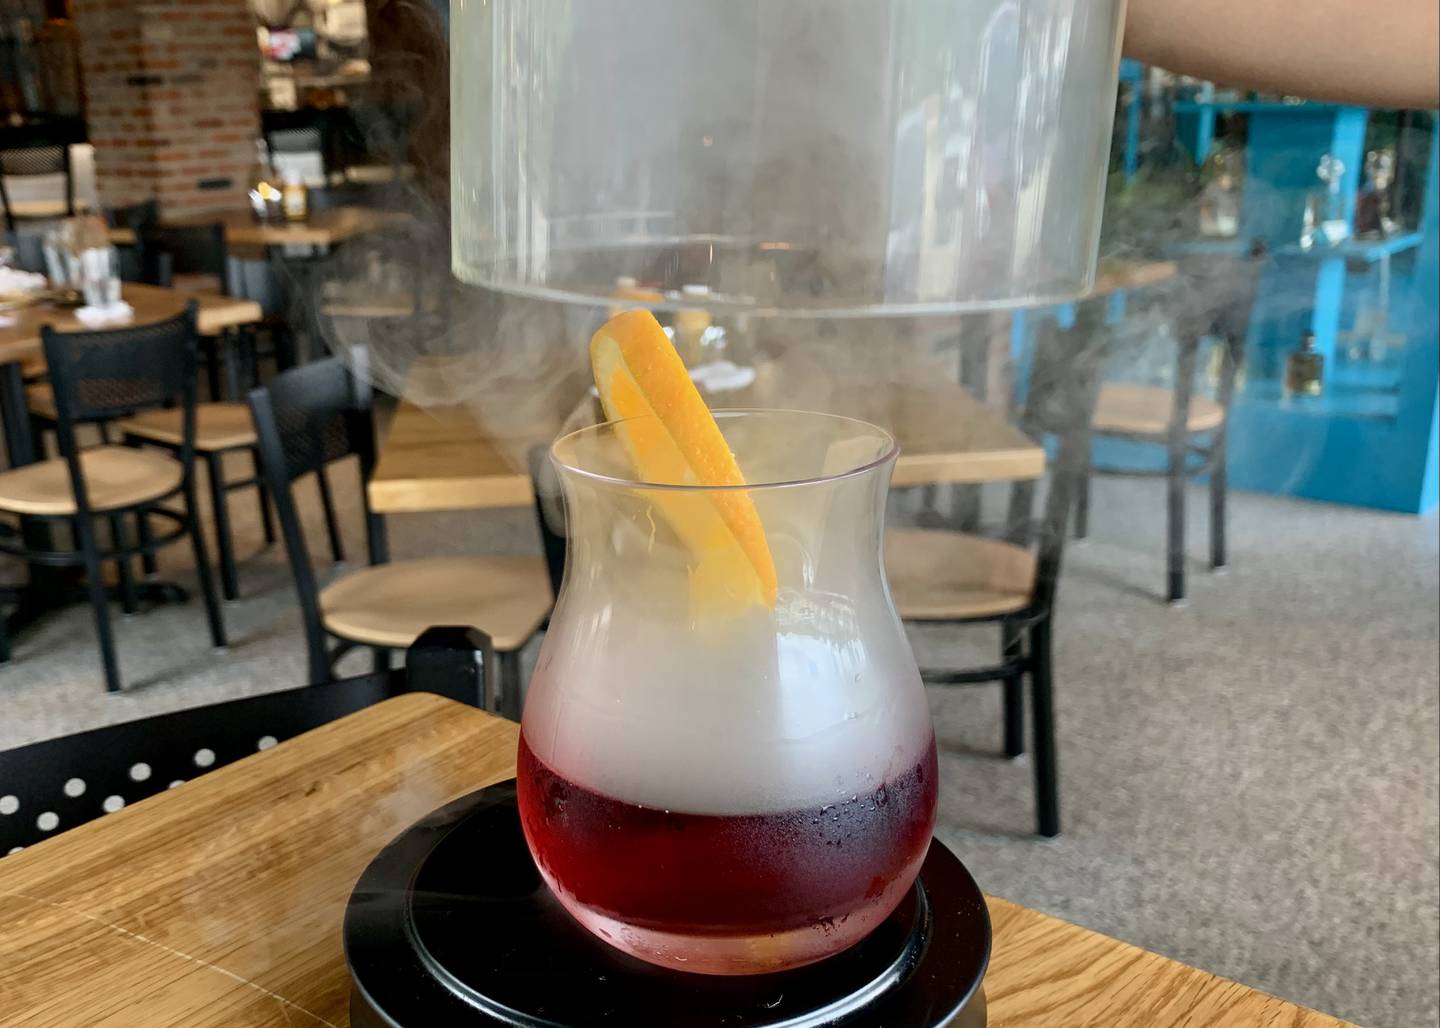 The Smoke on the Fox is a smokey twist on the Manhattan, replacing bitters with Licor 43, giving the cocktail a sweet finish. One of several cocktails at Dakotas.